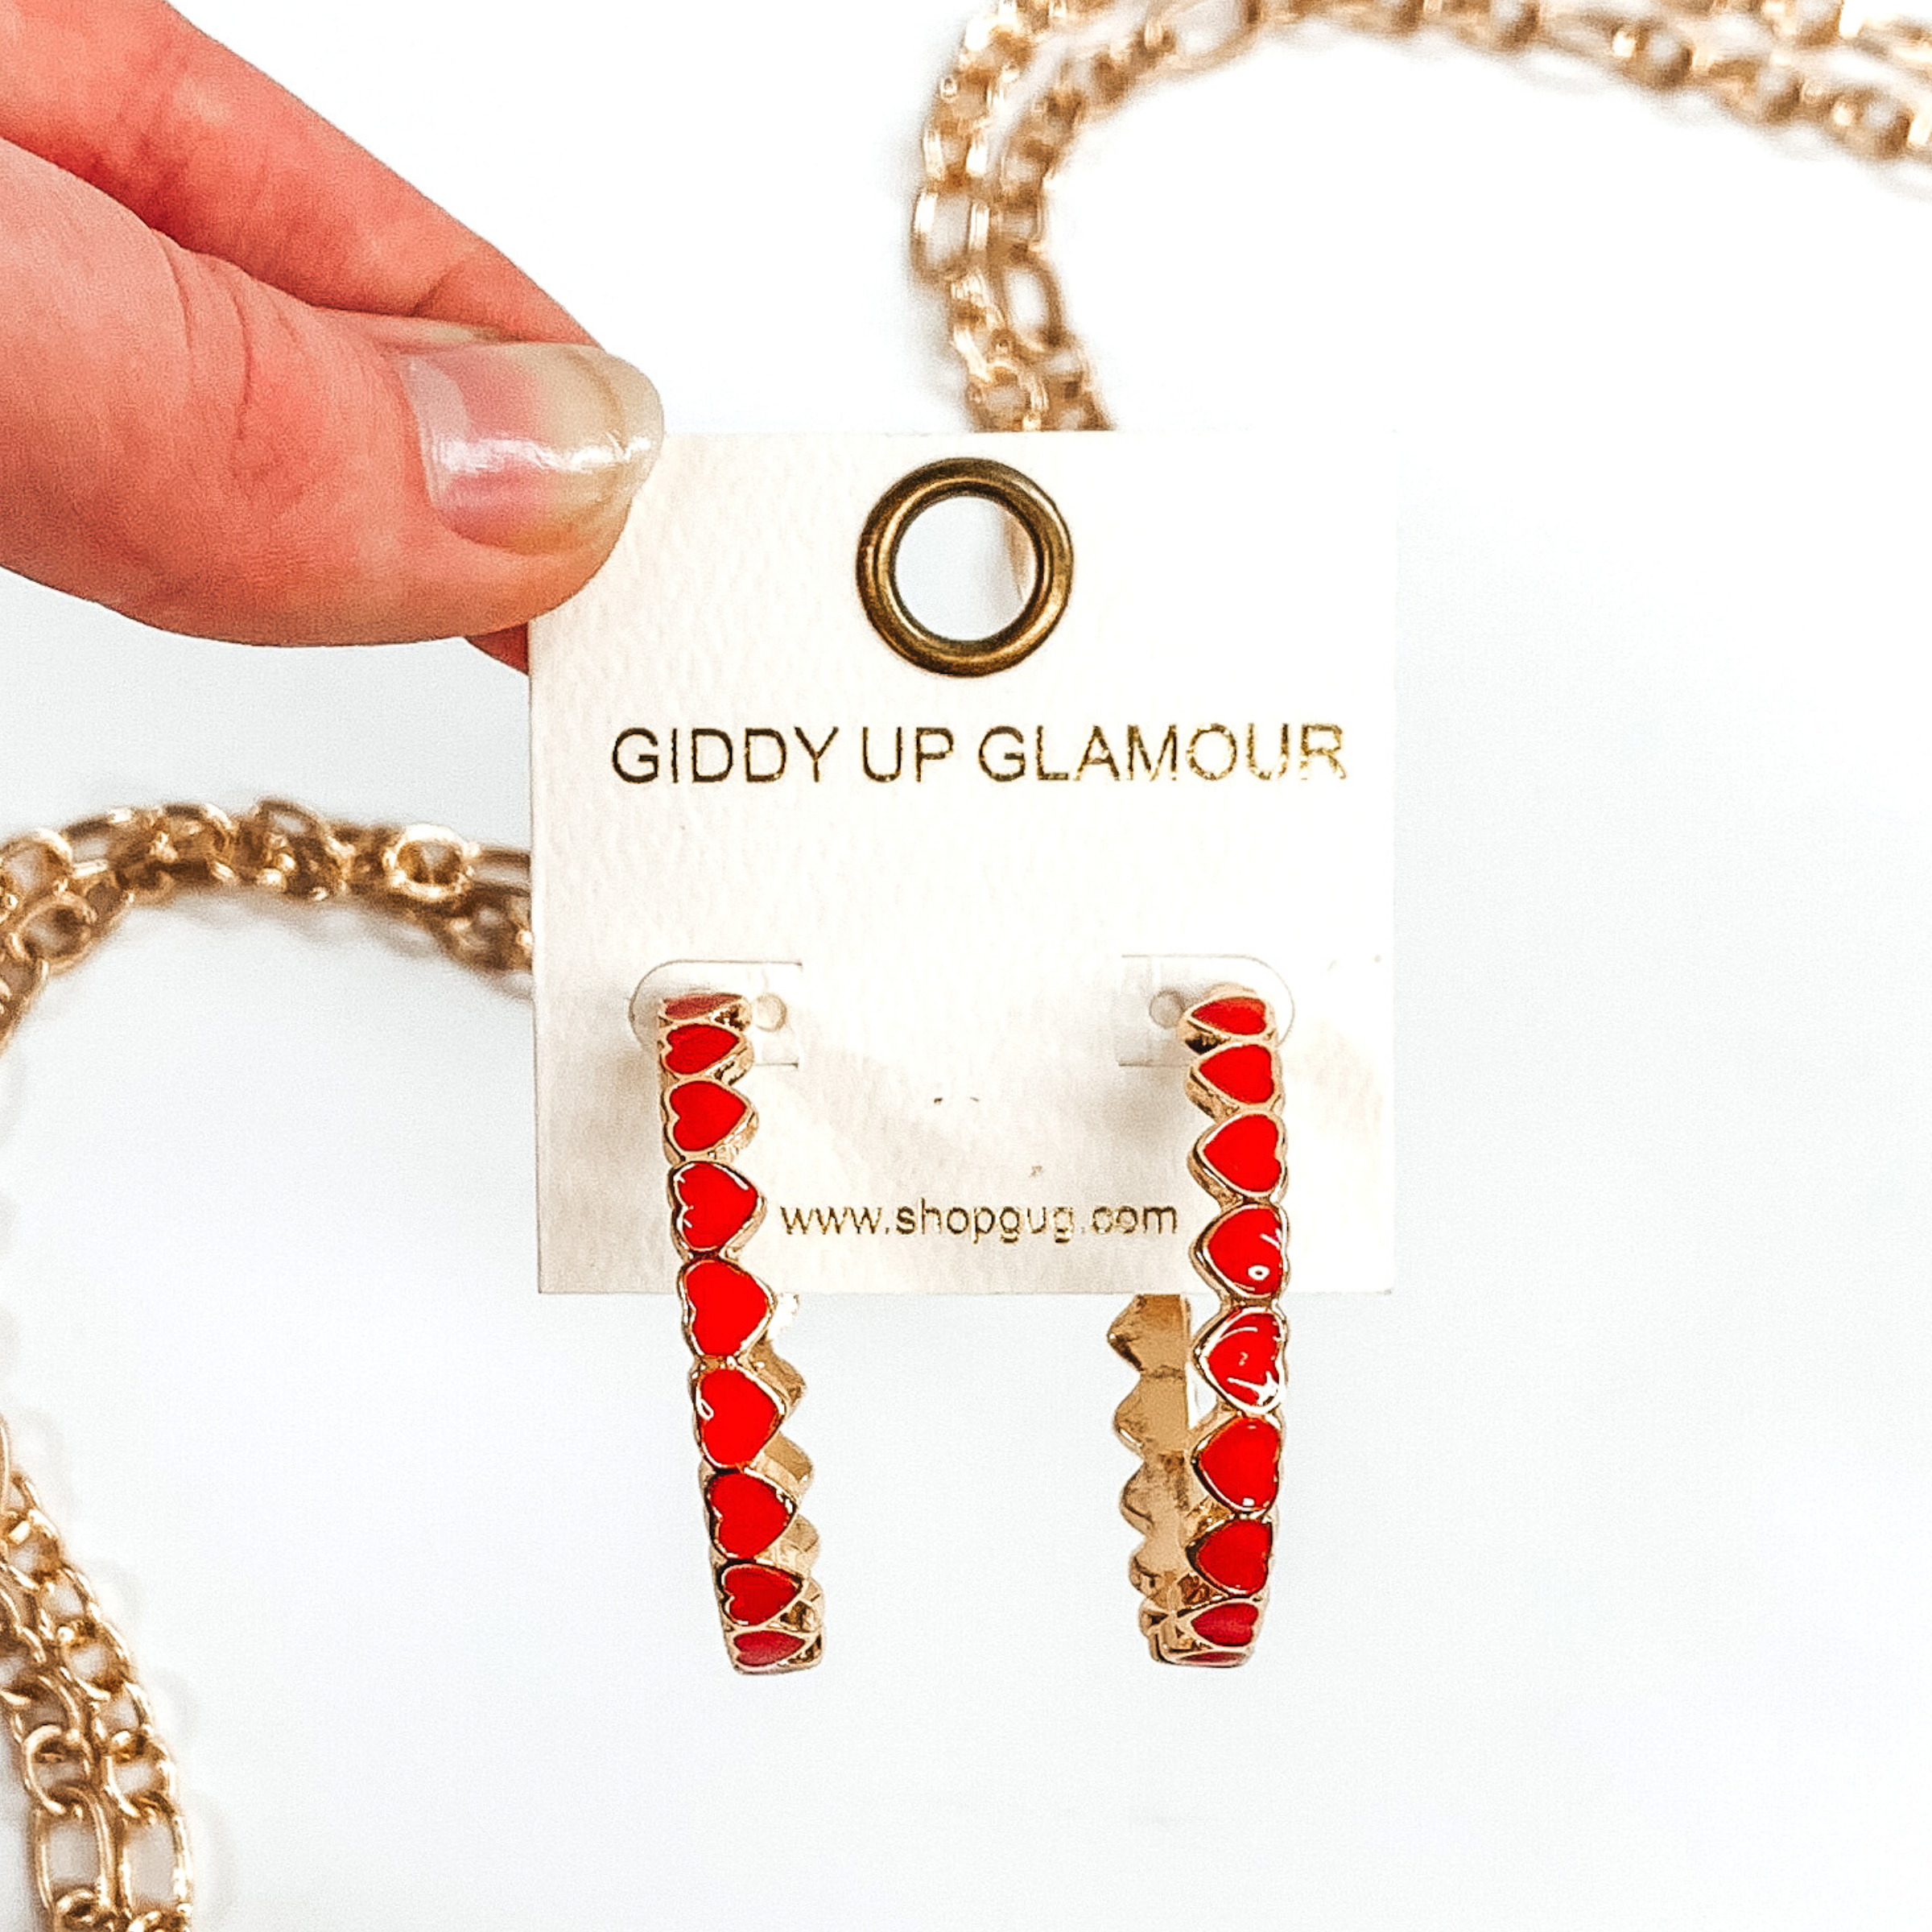 Gold outlined, red hearts that are connected to each other to form hoop earrings. These hoops are pictured on a white earring holder held by fingers on a white background with gold chains in the background.